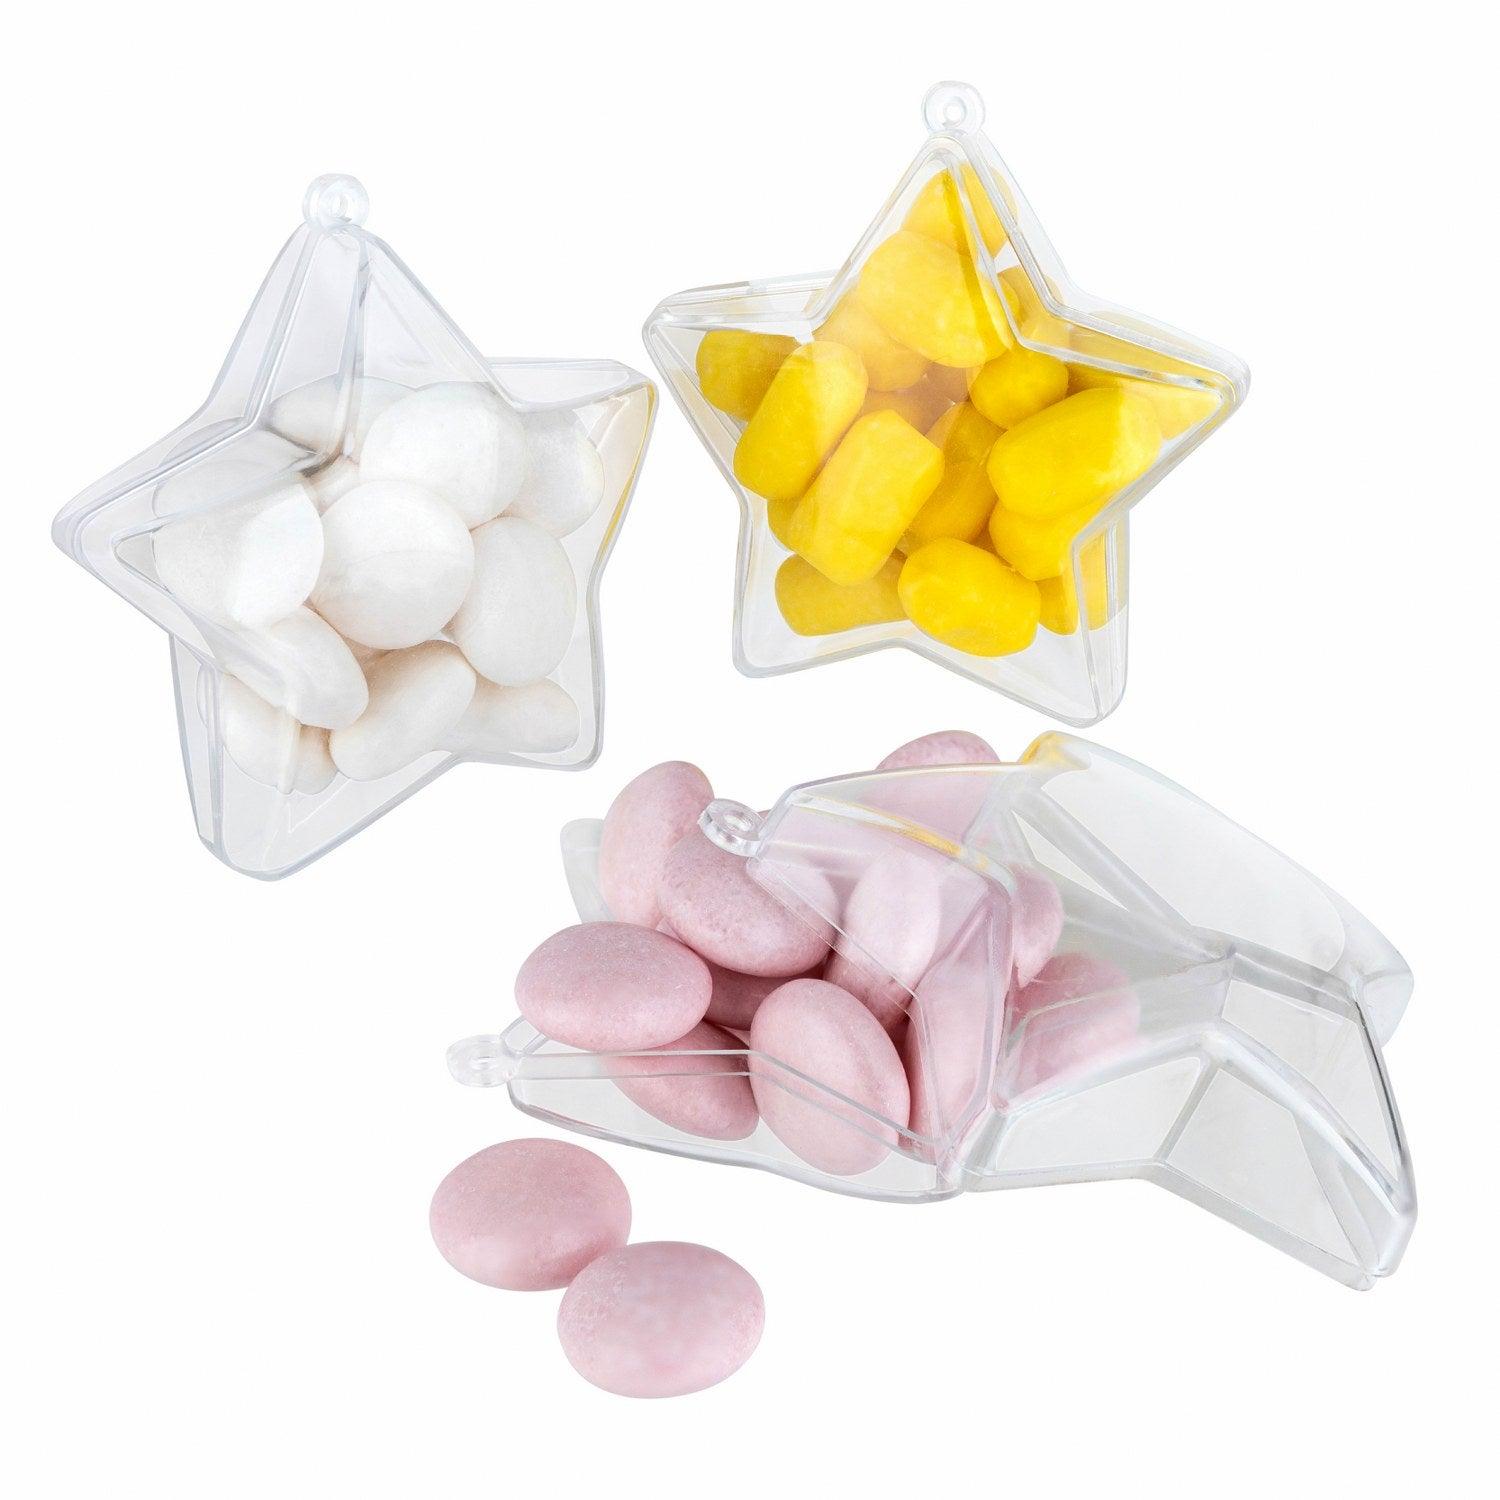 Star Shaped Acrylic Candy Boxes 24 Pack 2.95"X1.25" | Amazing Pinatas 